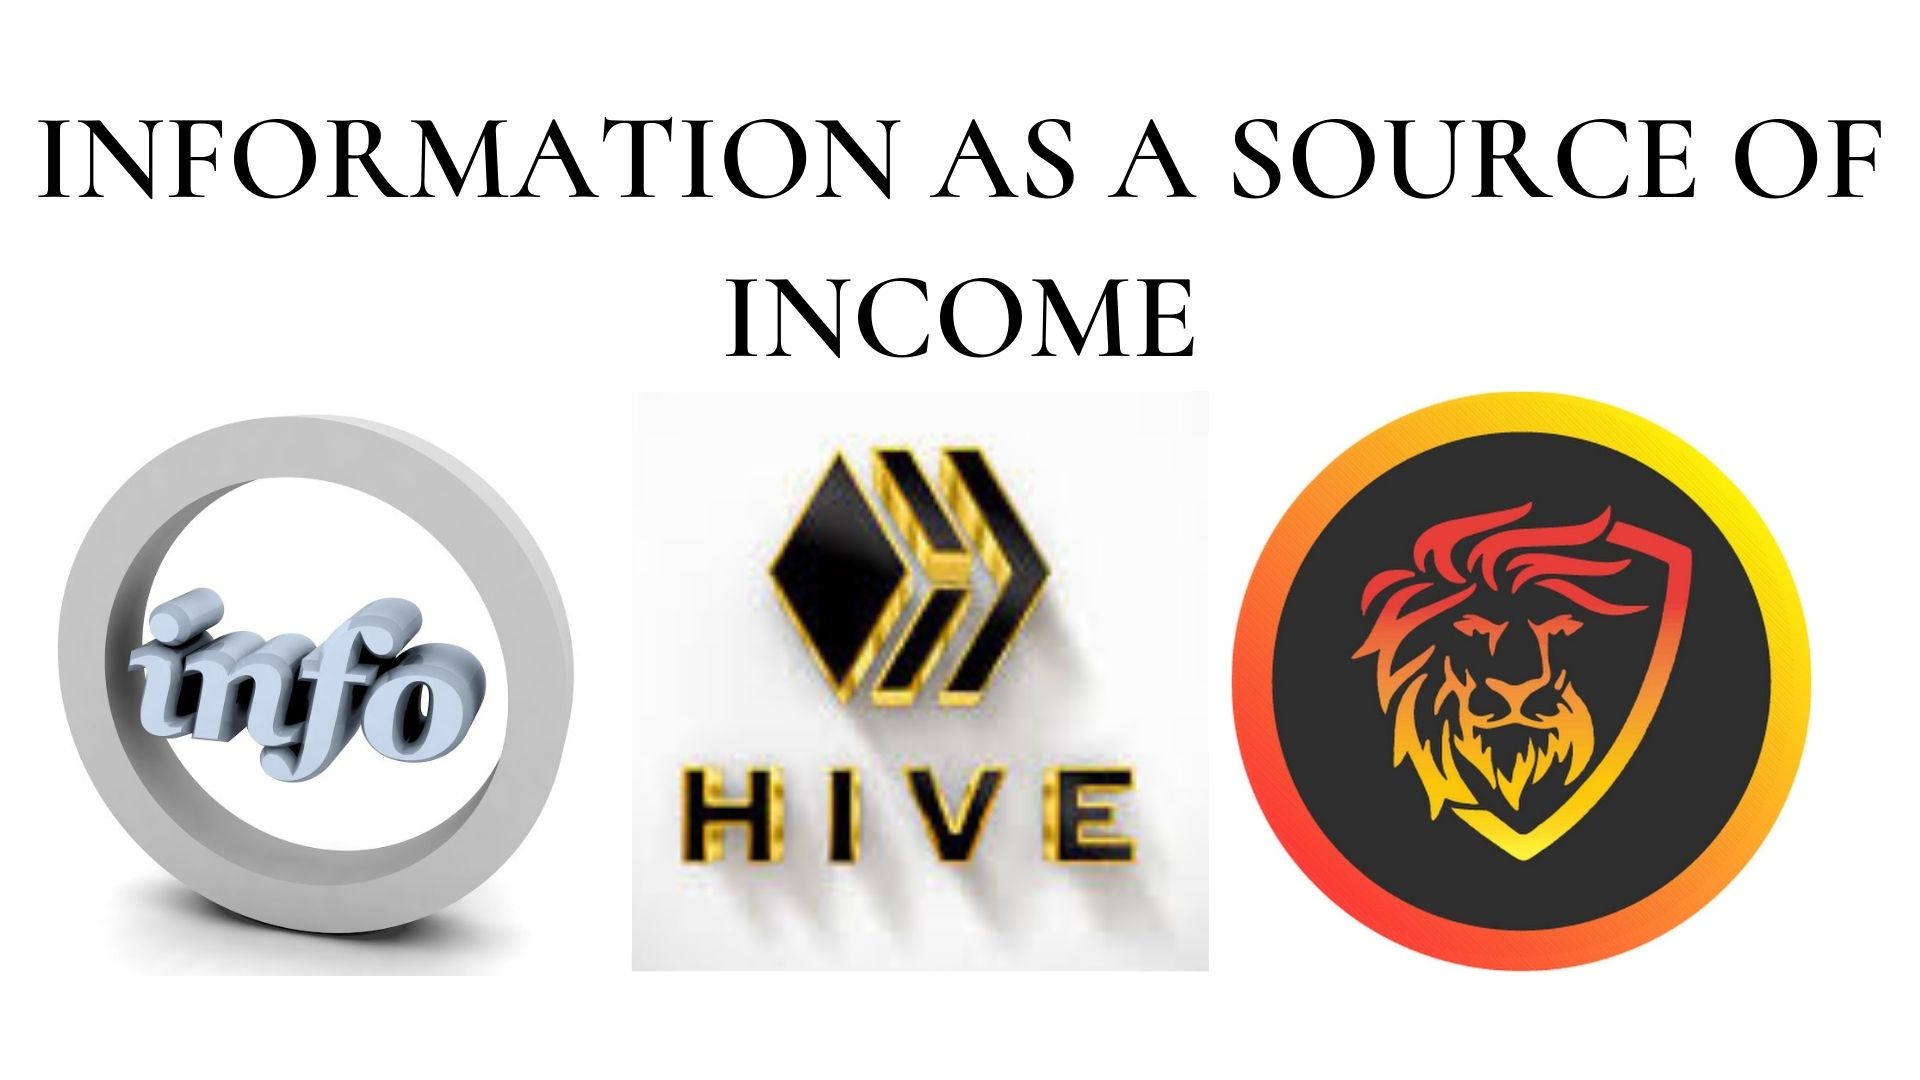 Information as a source of income.jpg